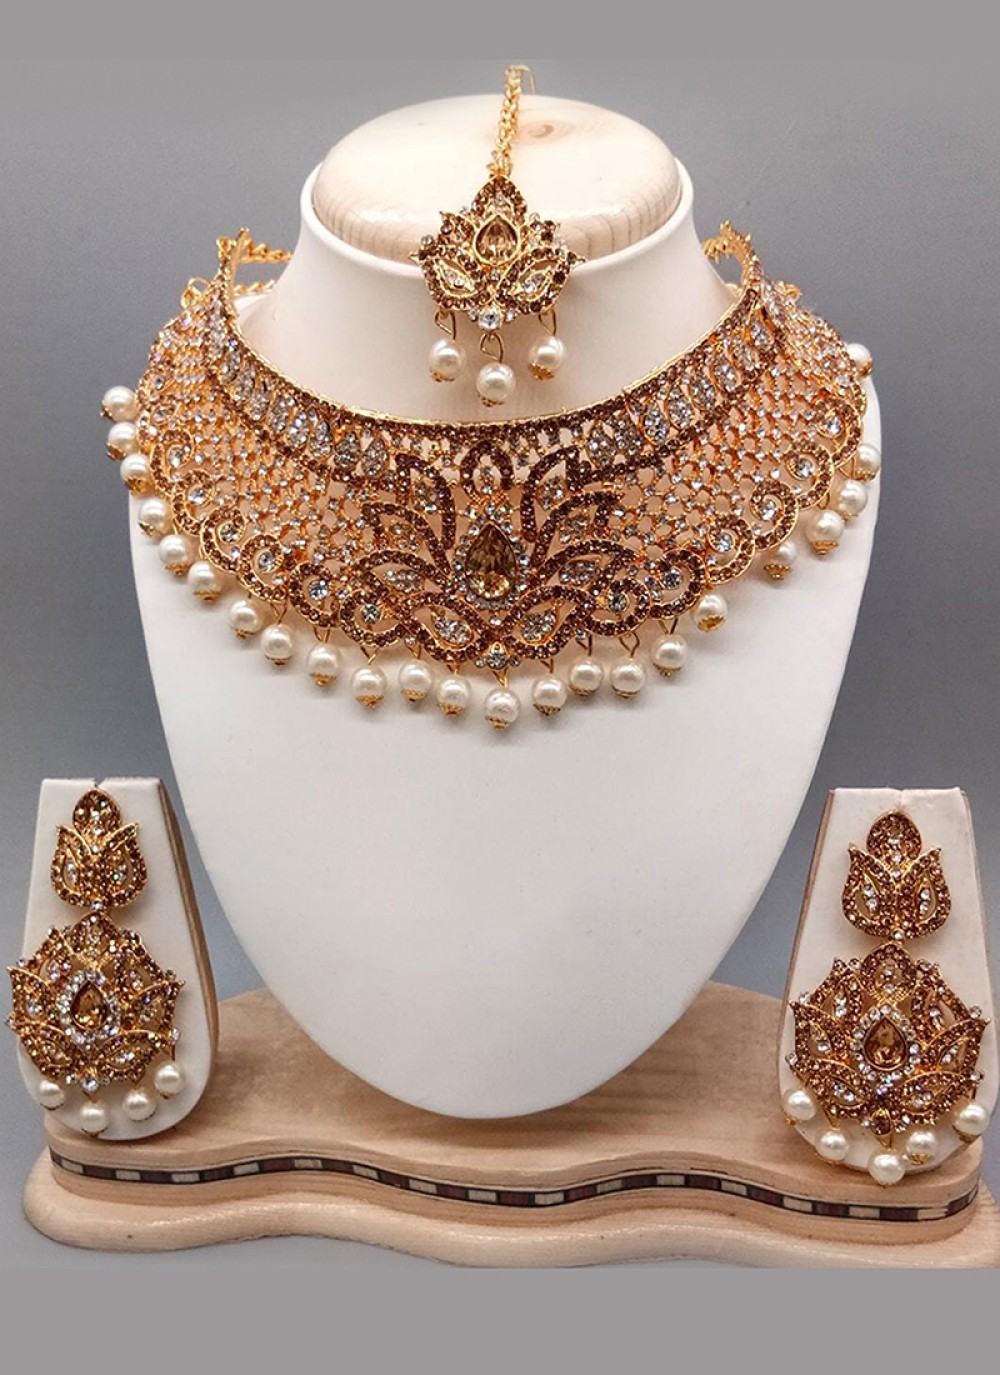 Online Shopping For Fashion, Imitation, Artificial Jewellery - Rubans